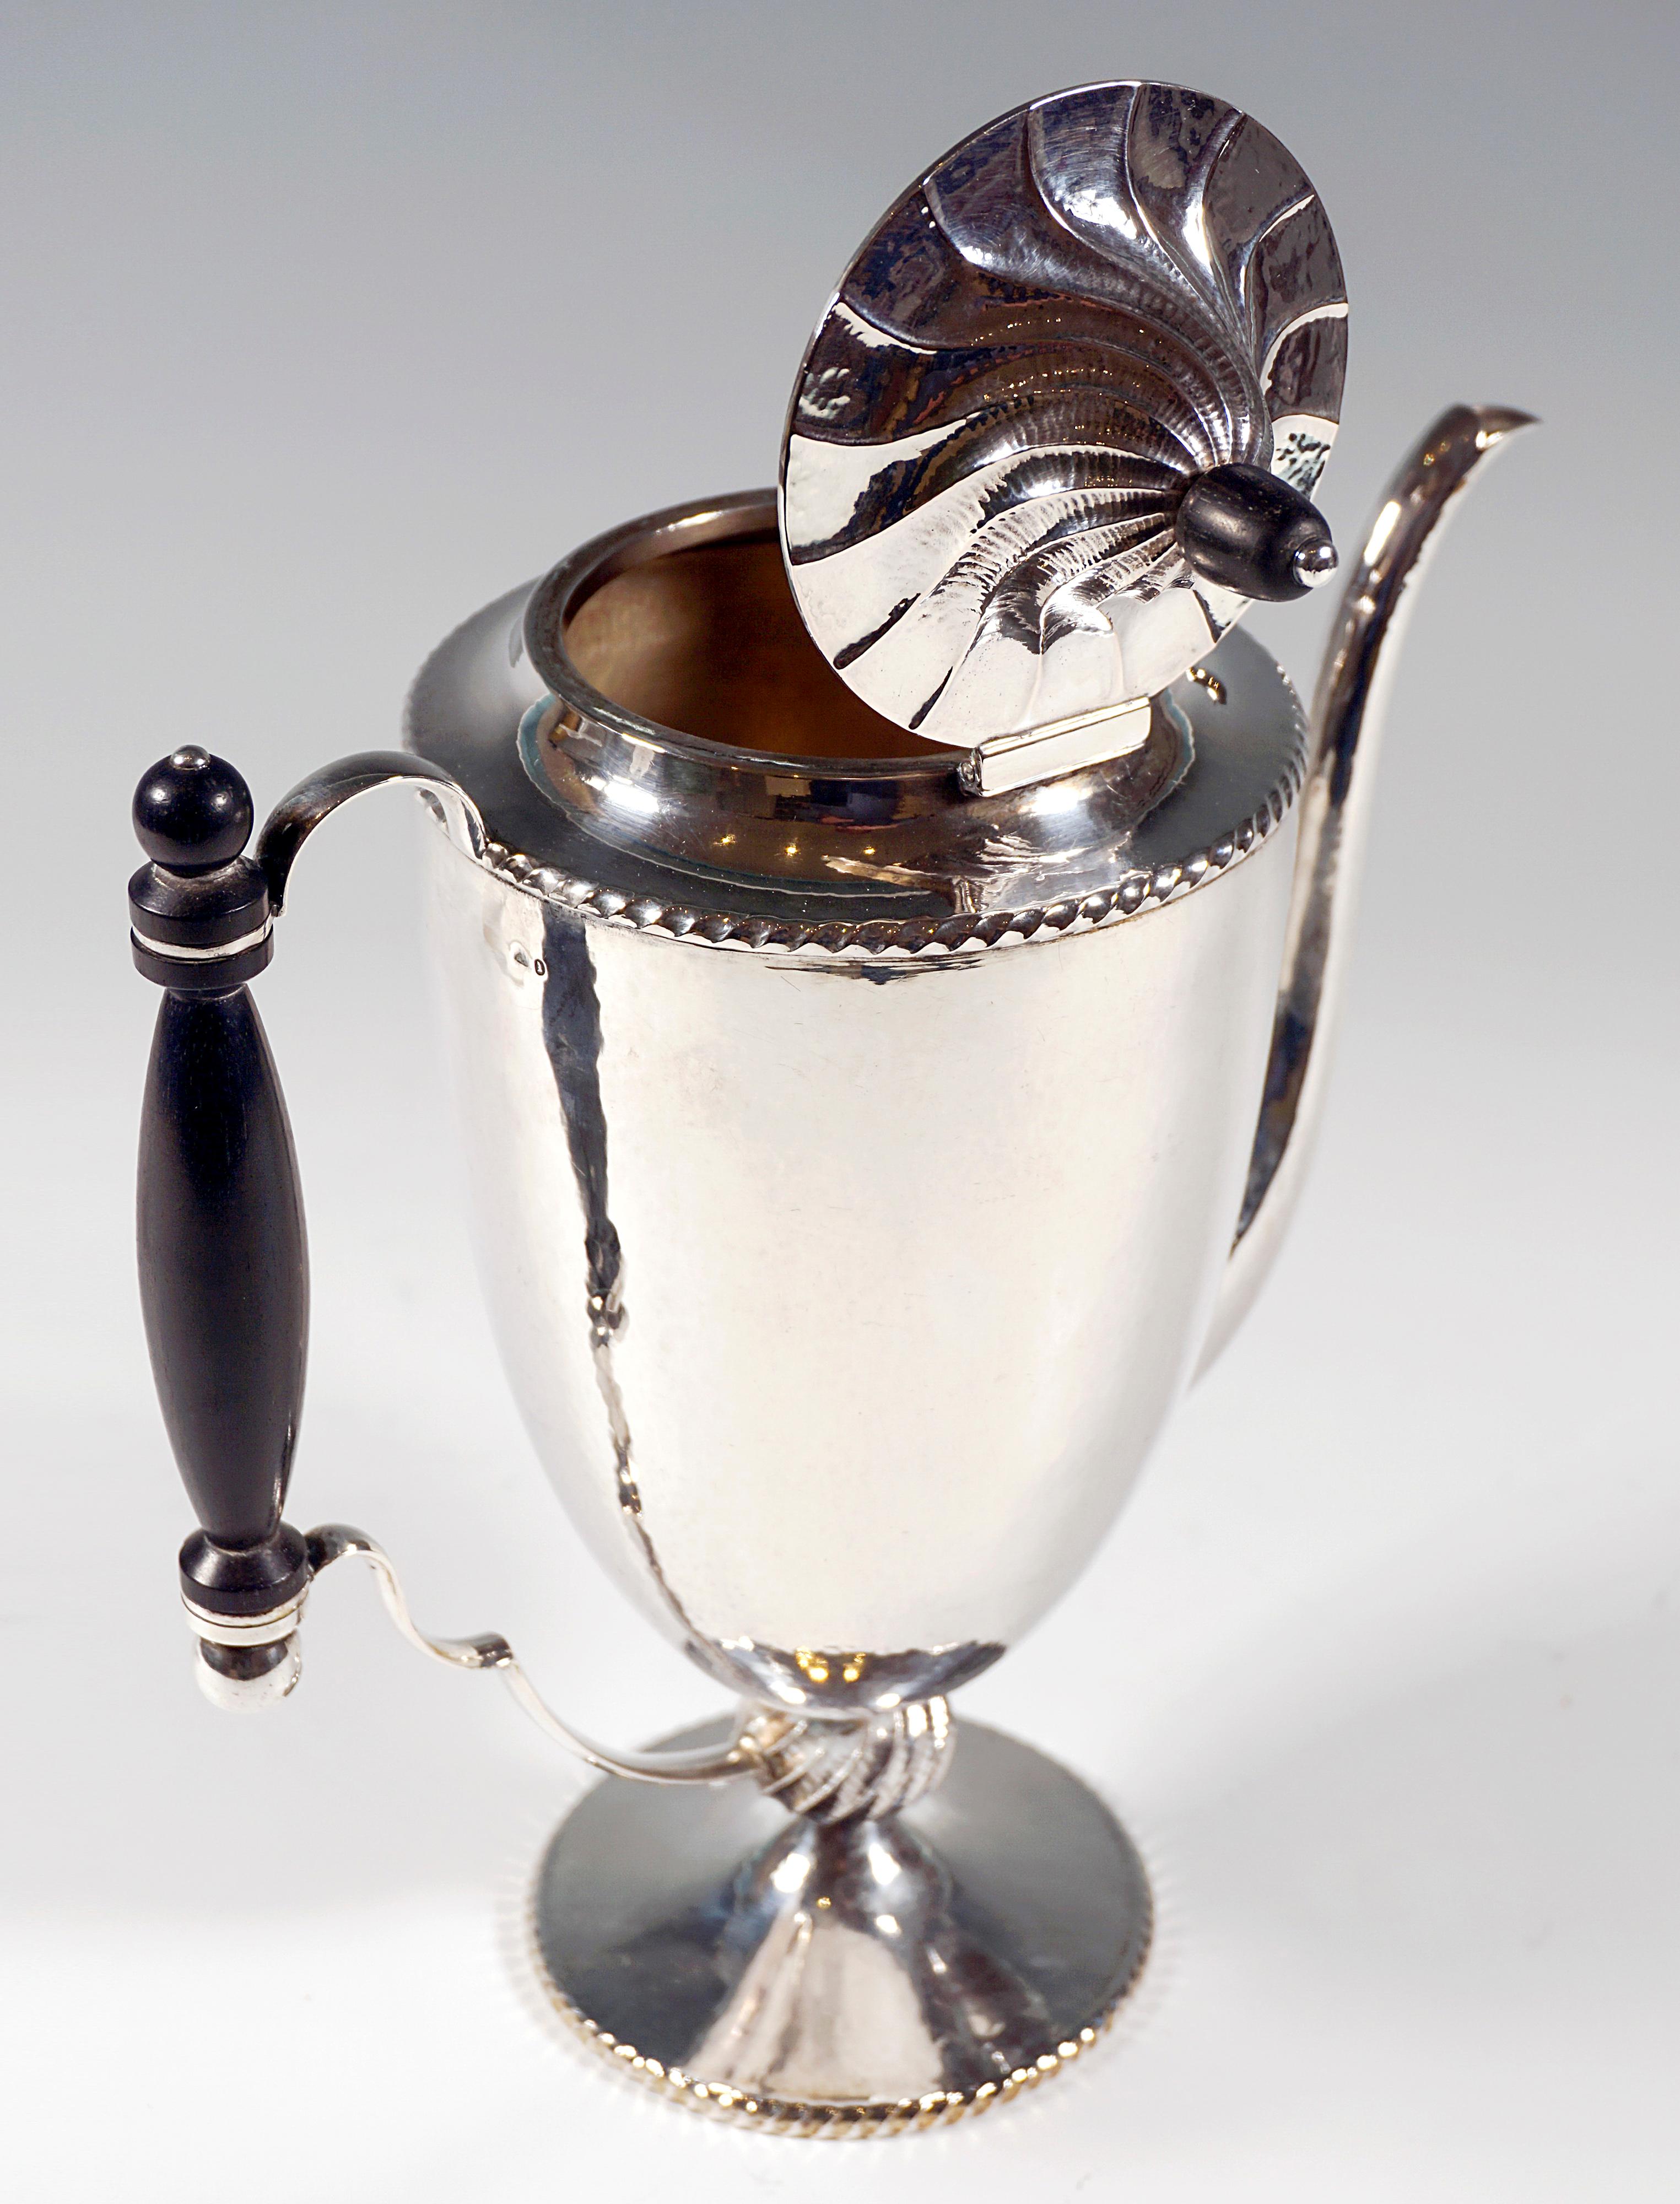 Early 20th Century Viennese Art Déco Silver Peche Style Coffee Pot by J.C. Klinkosch, Circa 1920 For Sale